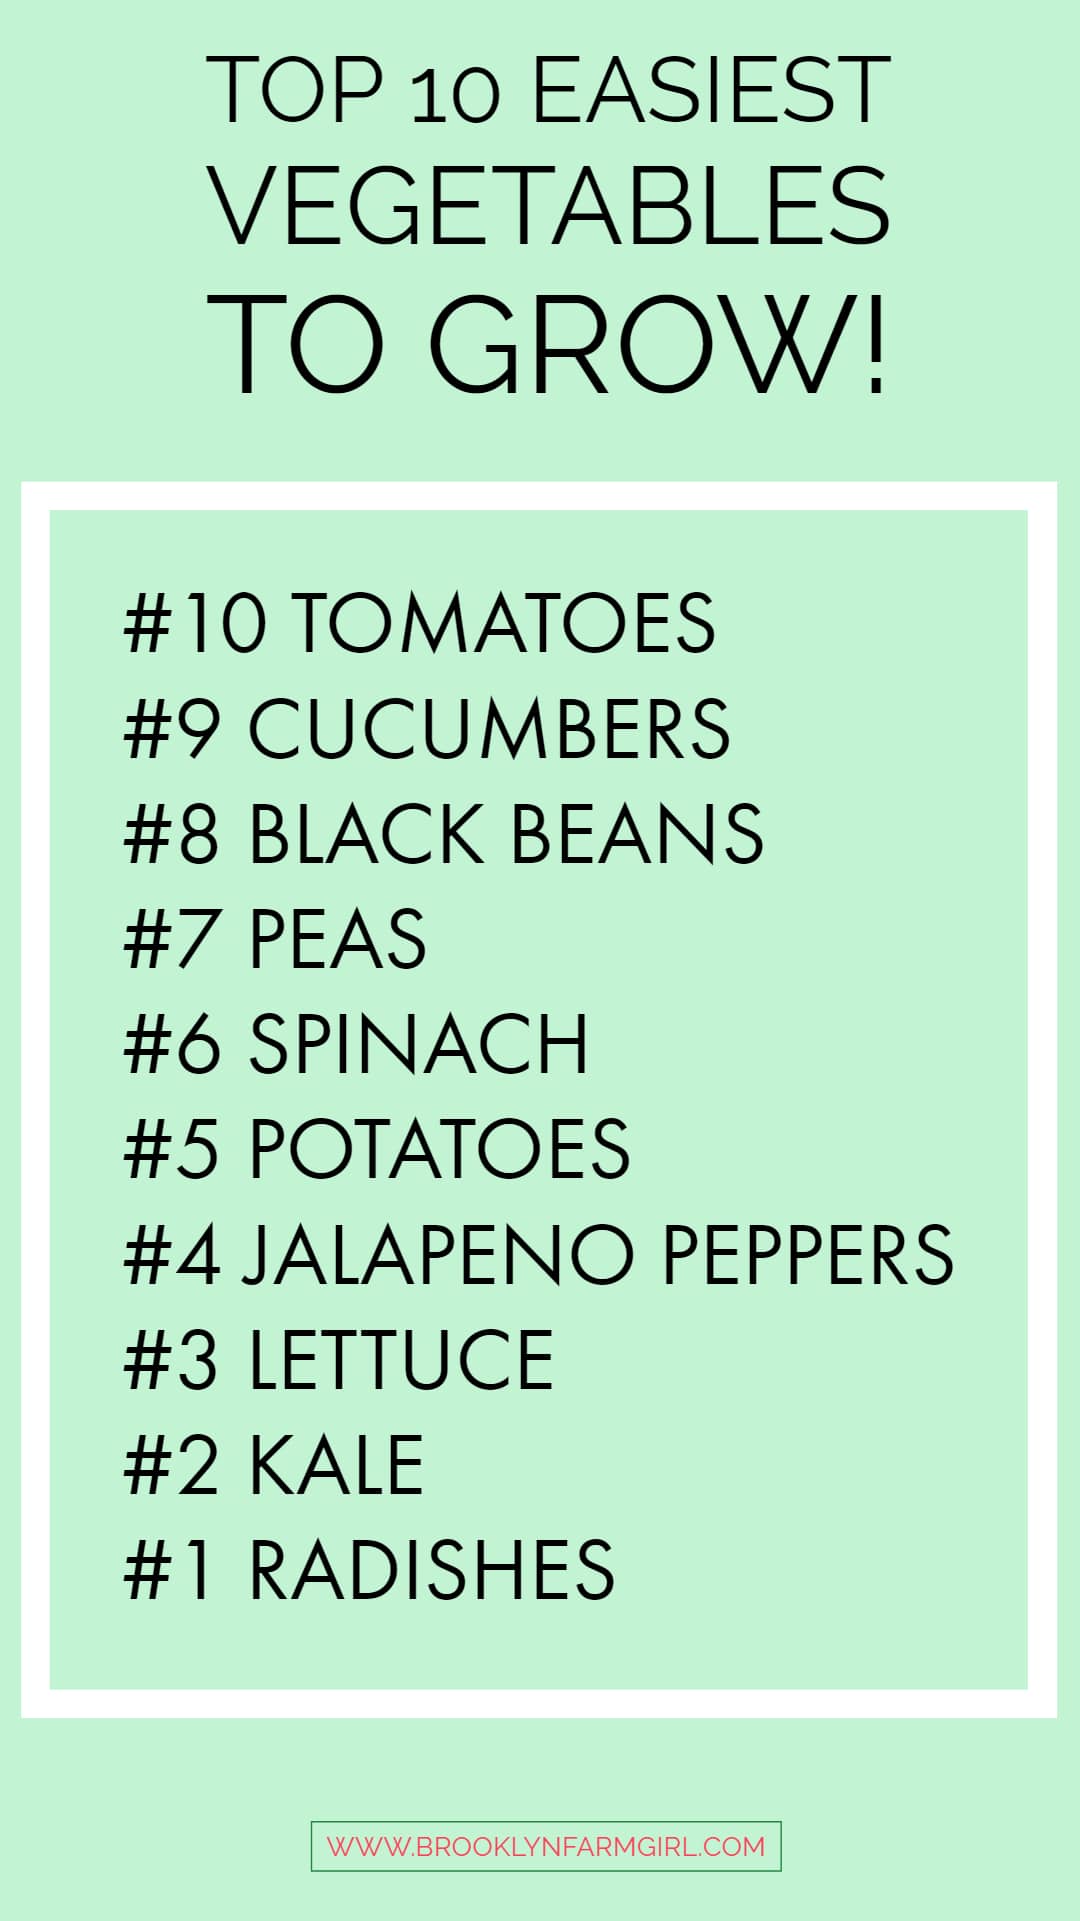 Top 10 Easiest Vegetables To Grow in the garden! All these vegetables are easy to grow from seed and in containers!  This is the perfect list for a first time gardener! 